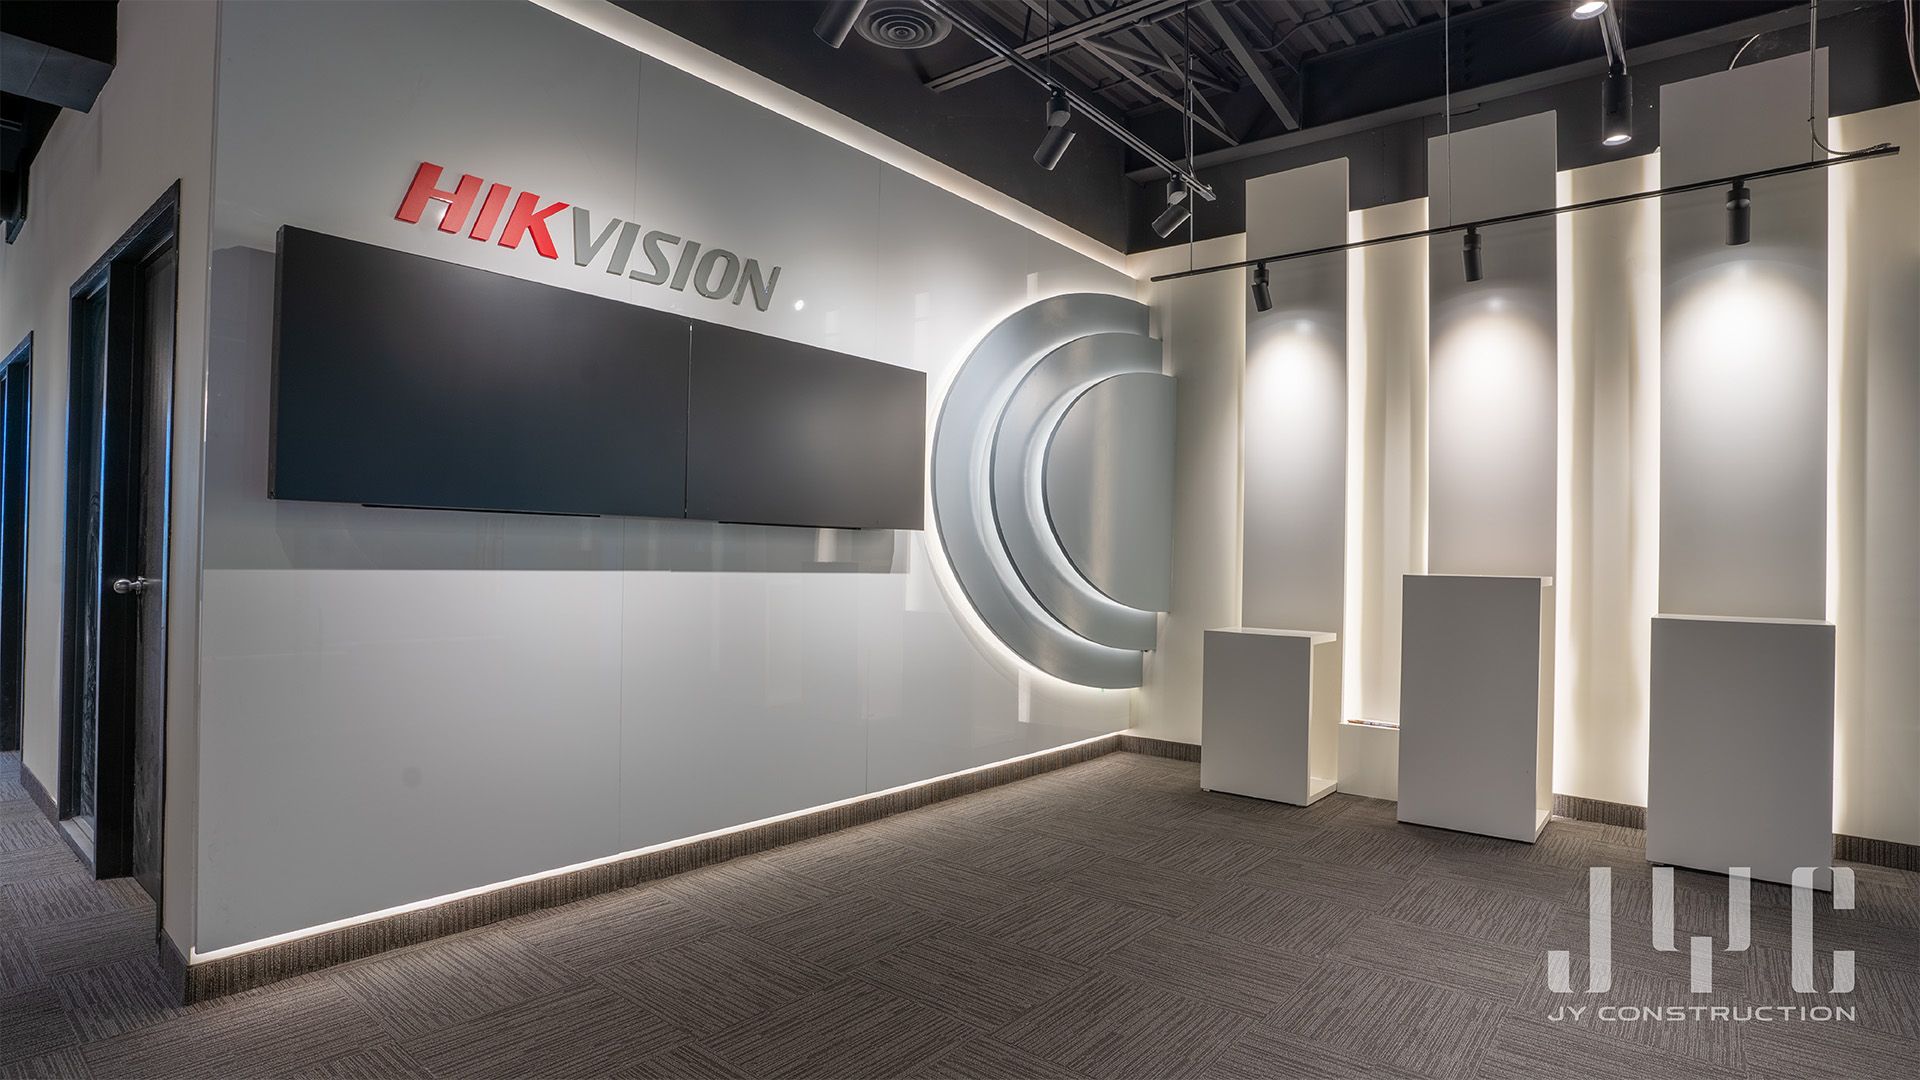 hikvision-mississauga-showroom-office-design-in-mississauga-by-jy-construction-in-english-2.jpg